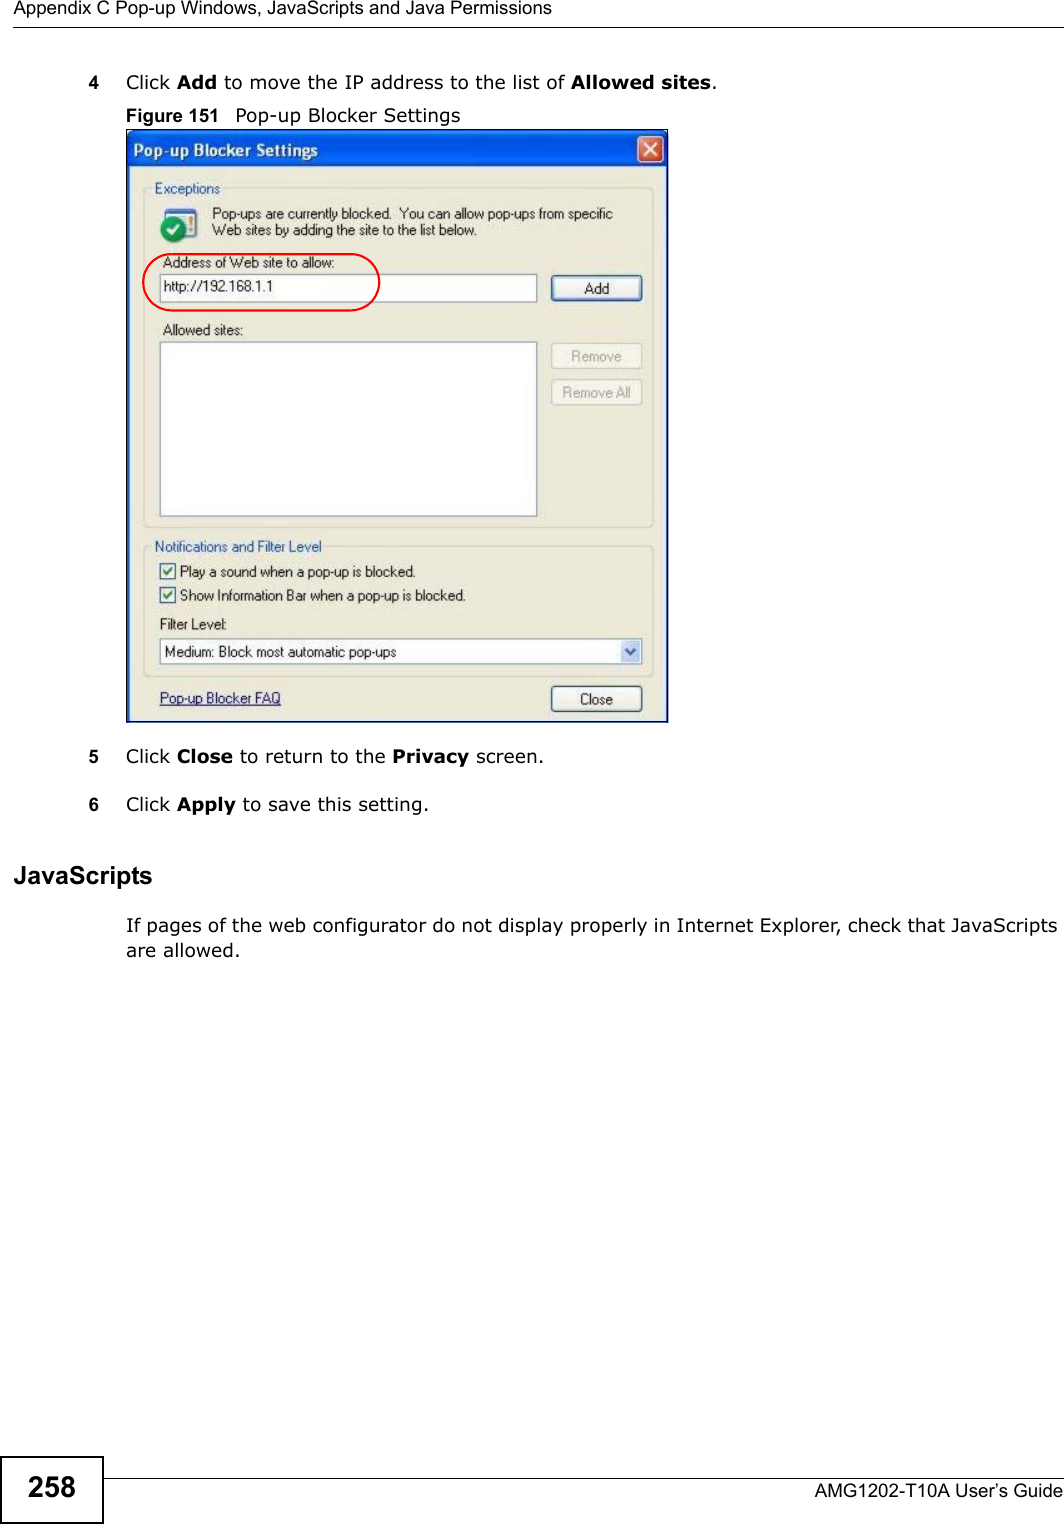 Appendix C Pop-up Windows, JavaScripts and Java PermissionsAMG1202-T10A User’s Guide2584Click Add to move the IP address to the list of Allowed sites.Figure 151   Pop-up Blocker Settings5Click Close to return to the Privacy screen. 6Click Apply to save this setting. JavaScriptsIf pages of the web configurator do not display properly in Internet Explorer, check that JavaScripts are allowed. 